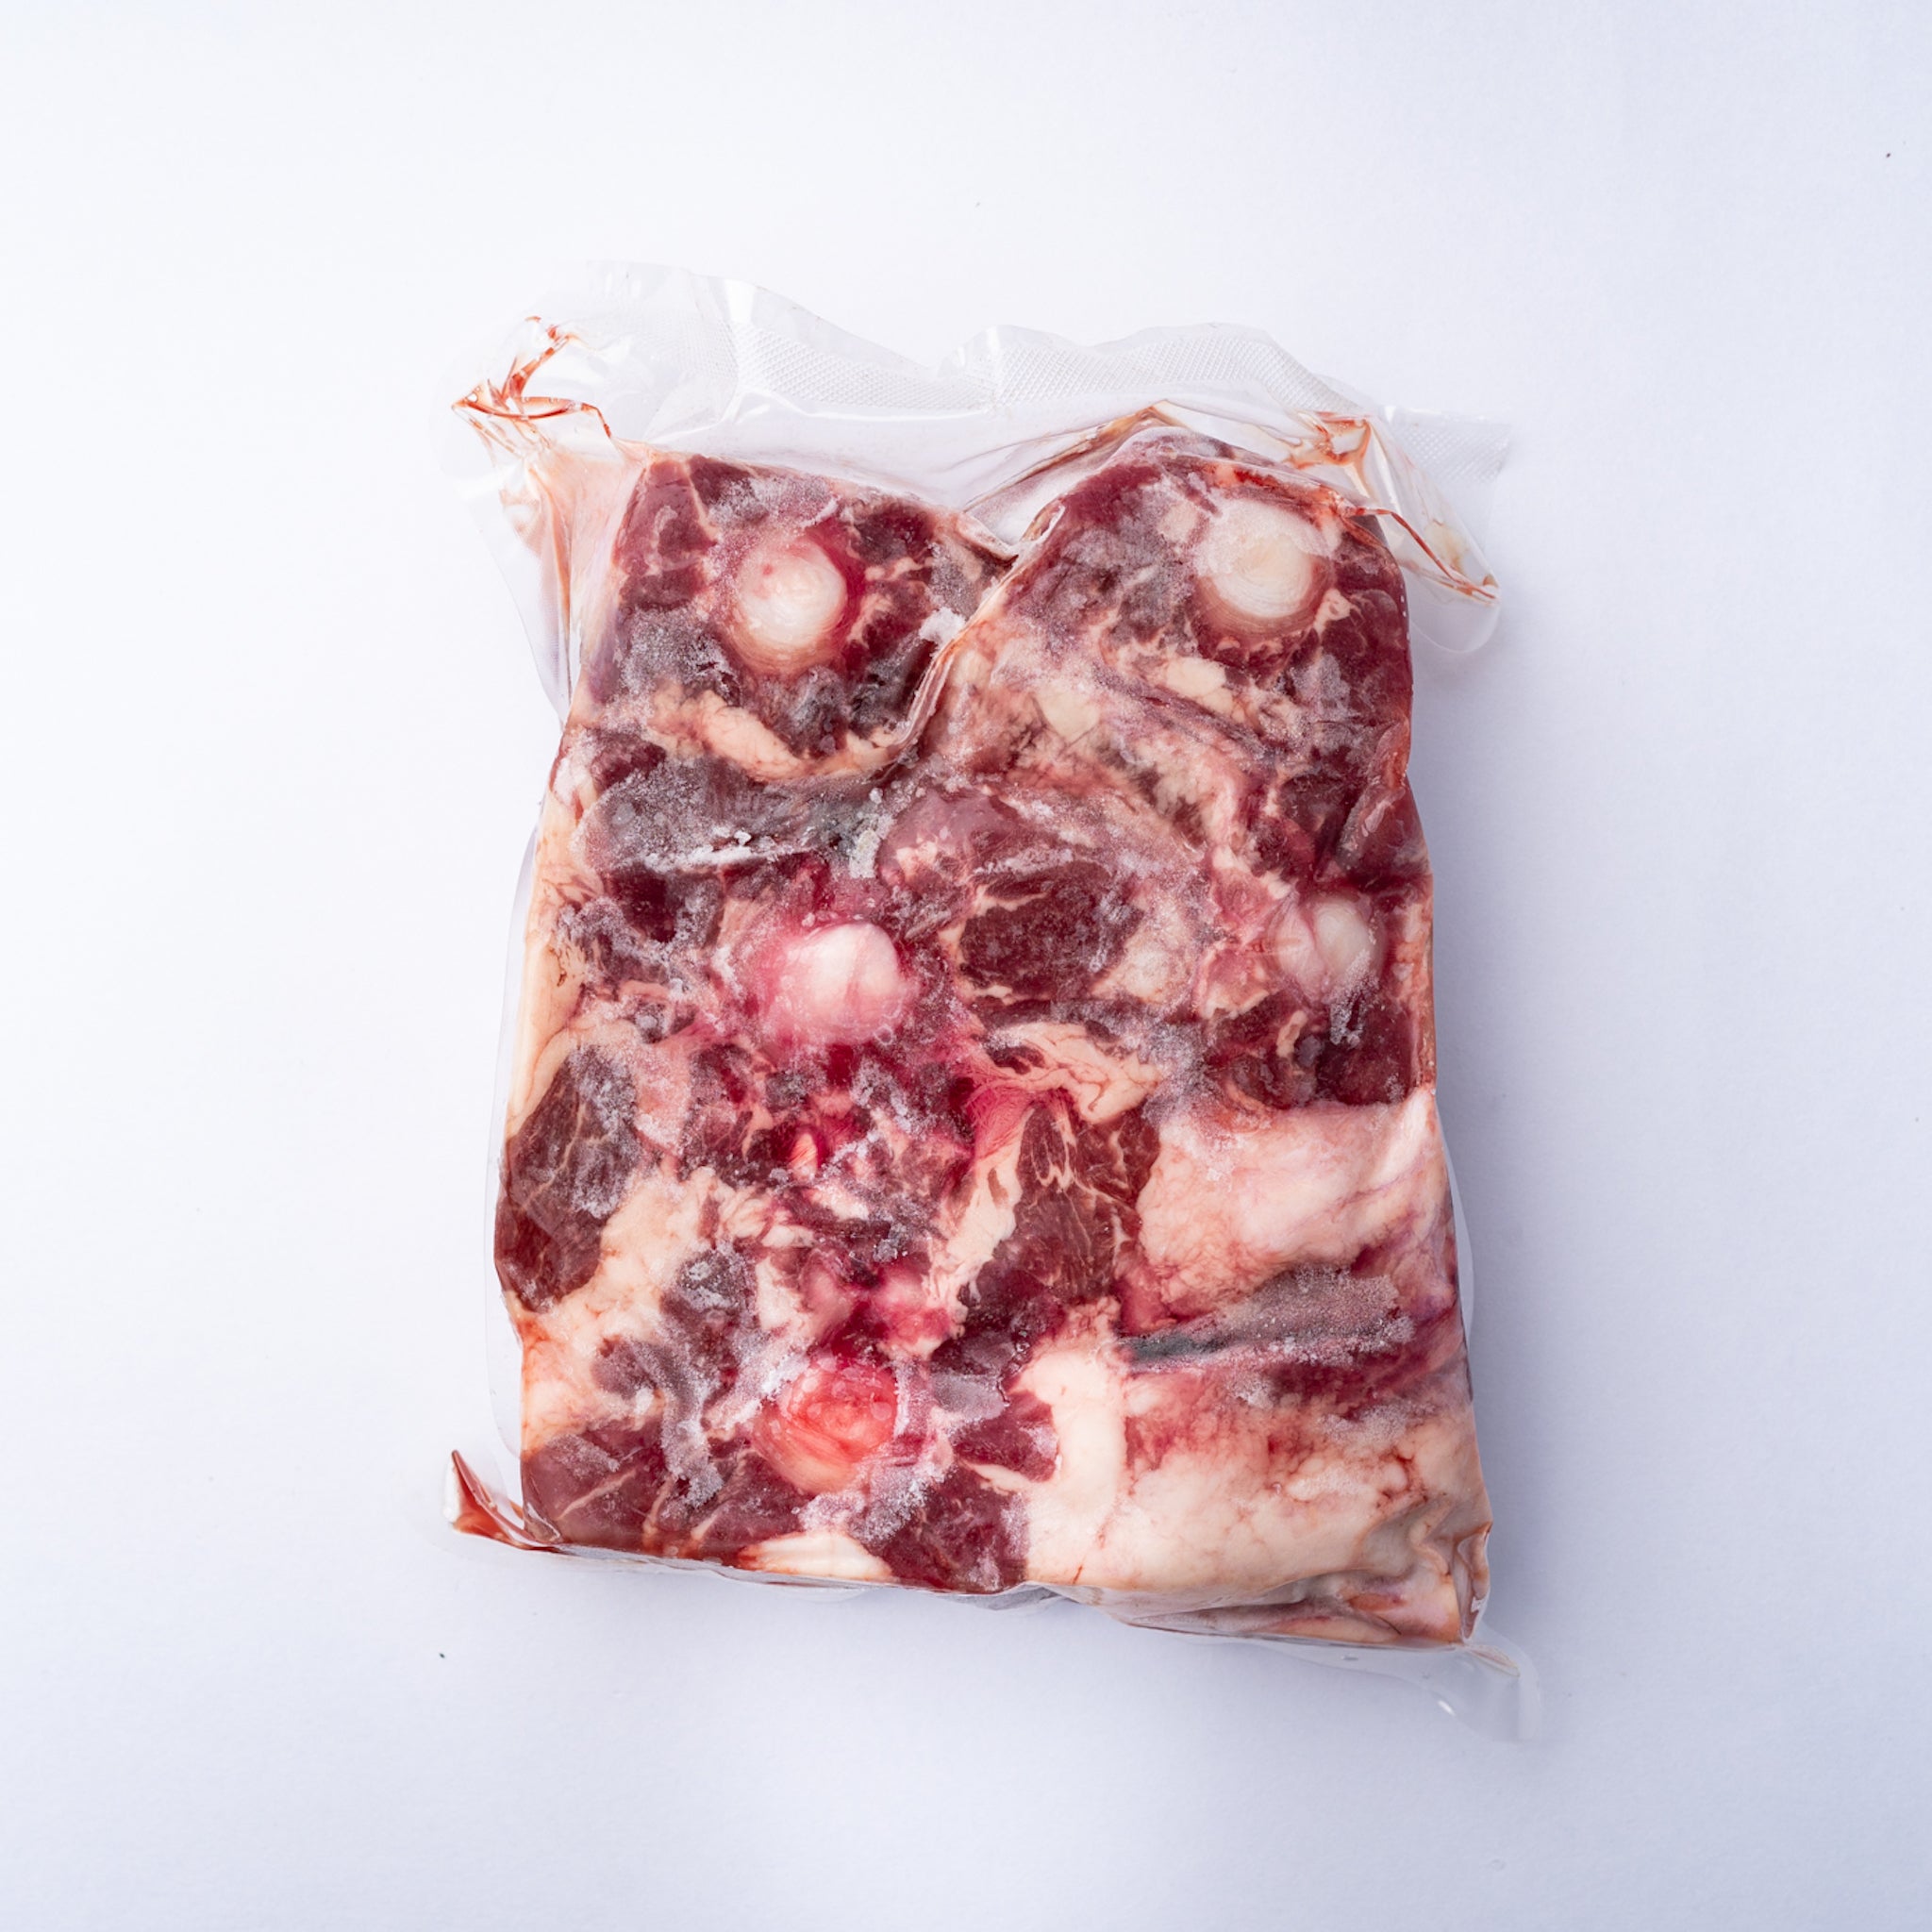 Grain Fed Angus Ox Tail pieces in a vacuum bag.